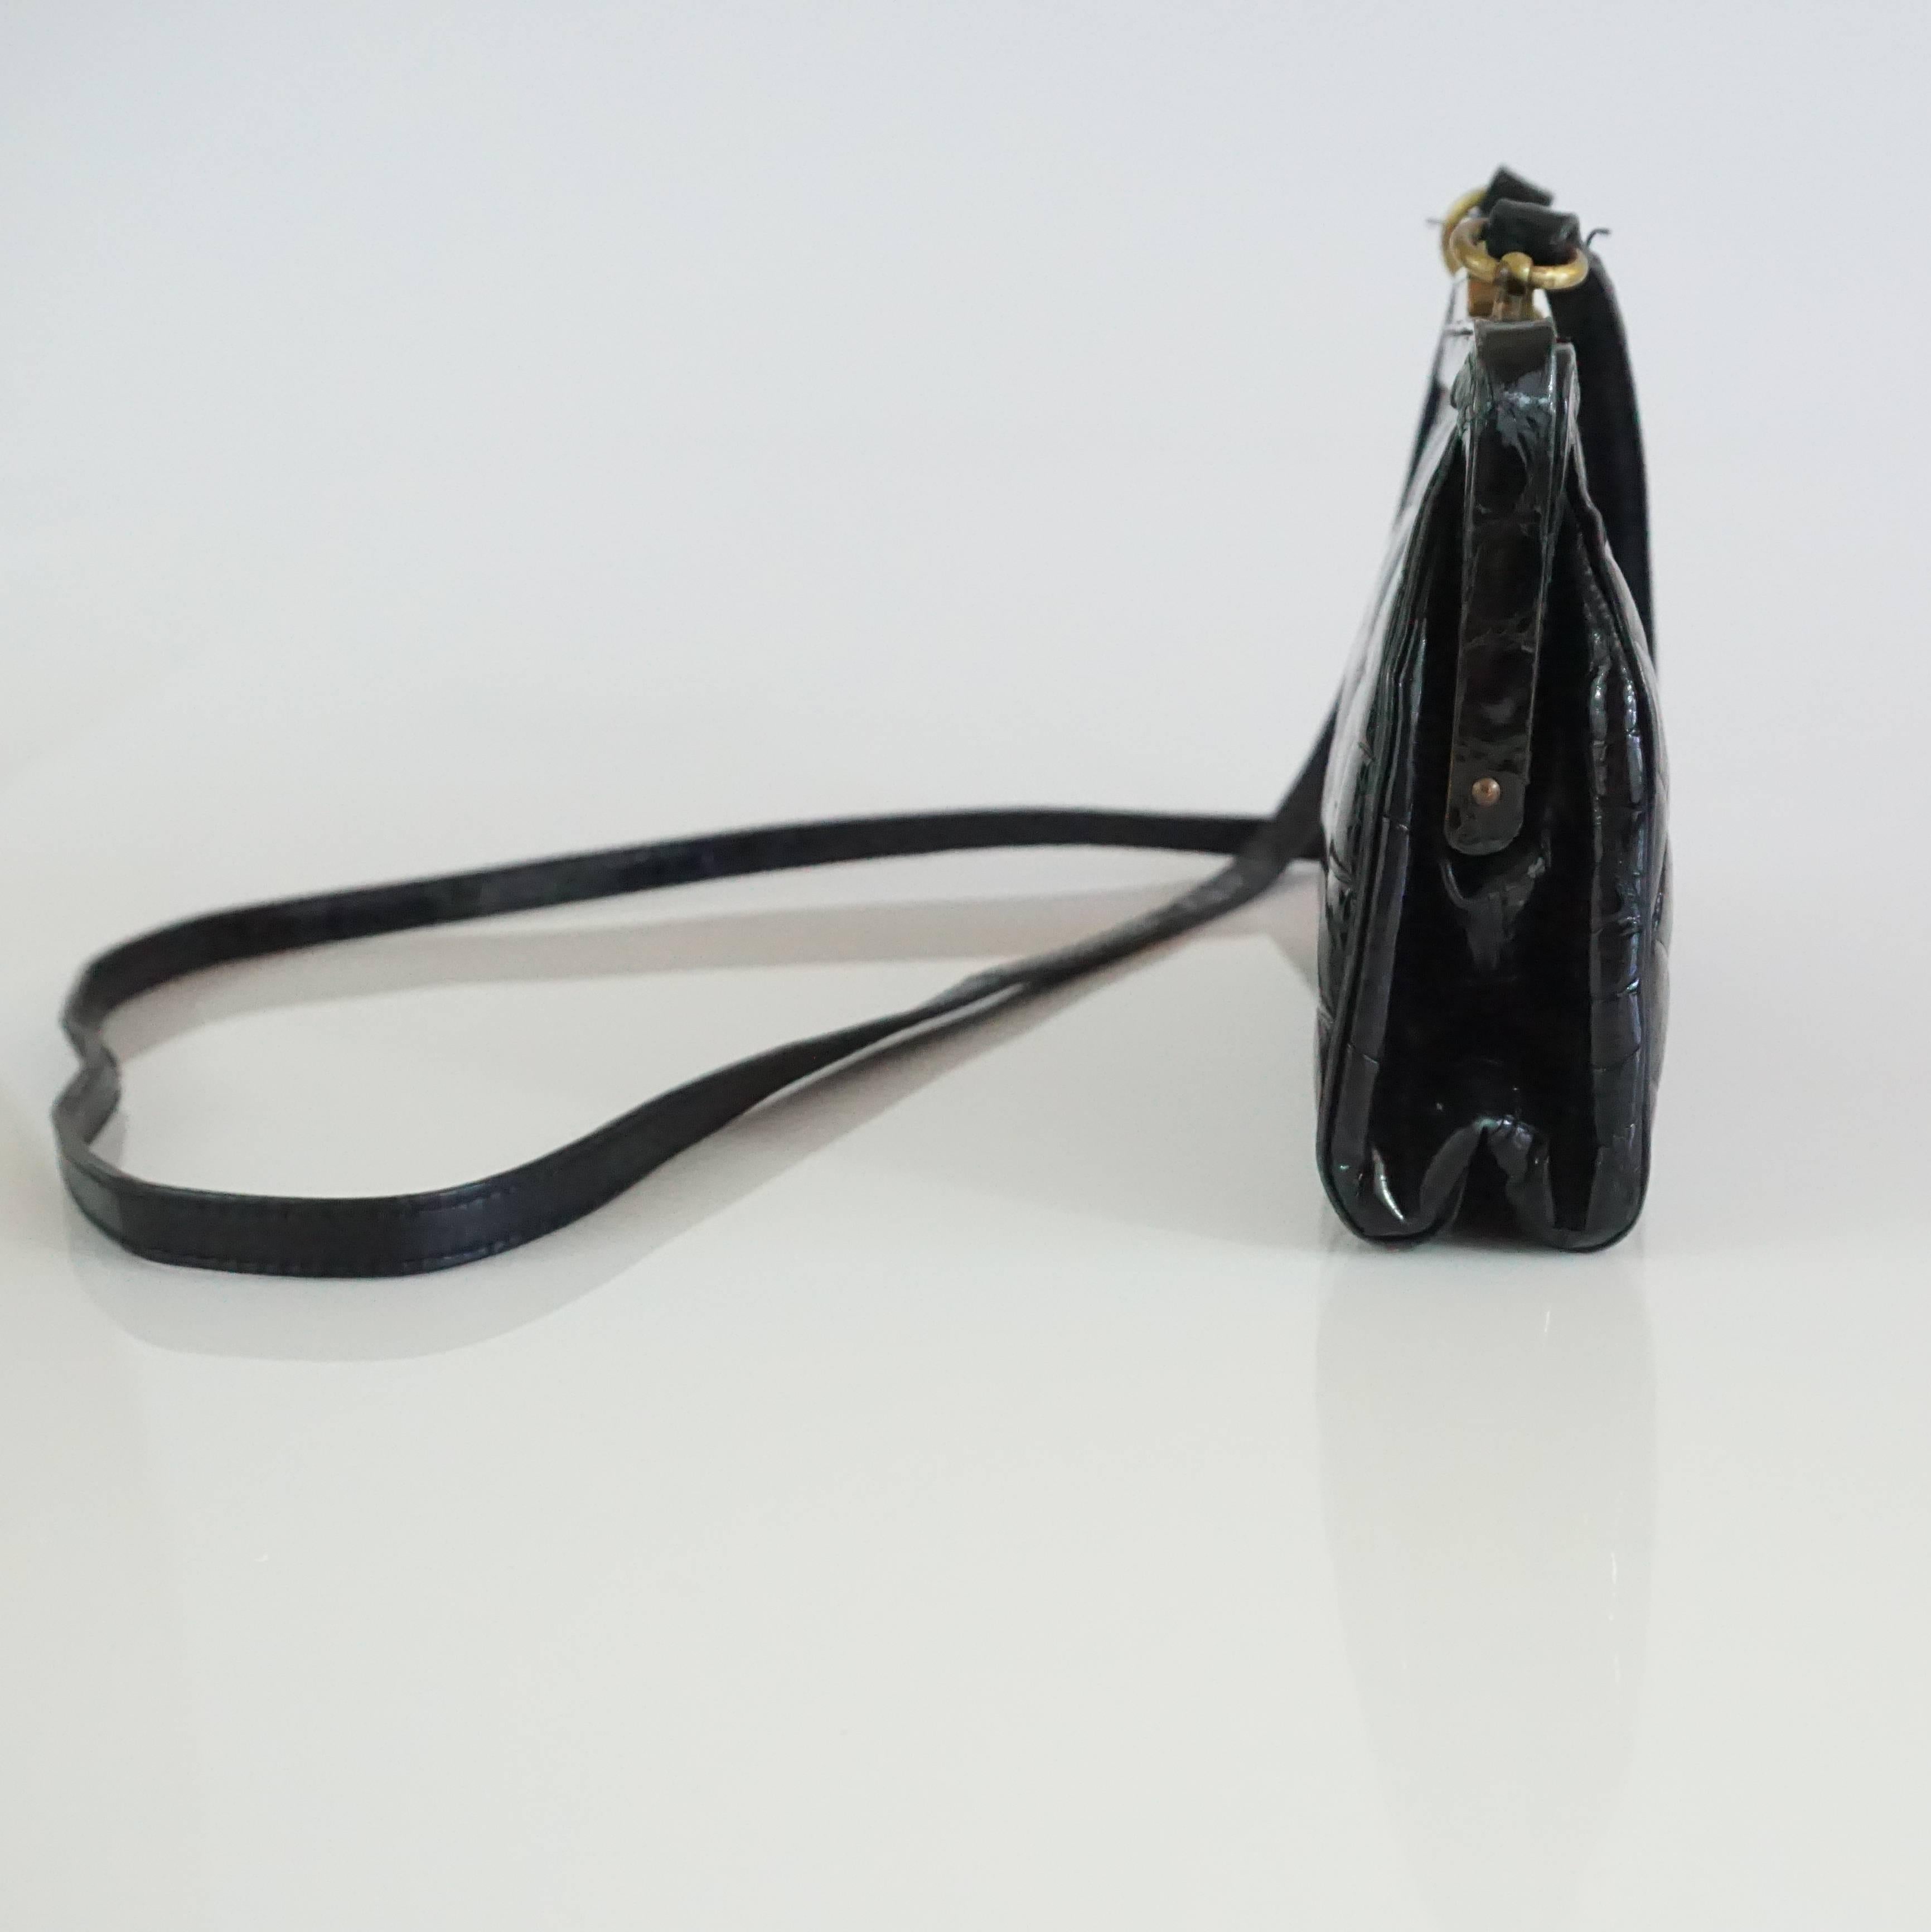 Marino Black Alligator Crossbody Bag - 1990's. This bag is a timeless piece that is just a trendy now as it was in the 90's. It features a long leather strap, gold hardware, a slide closure, black leather lining, and one interior pocket. It is in